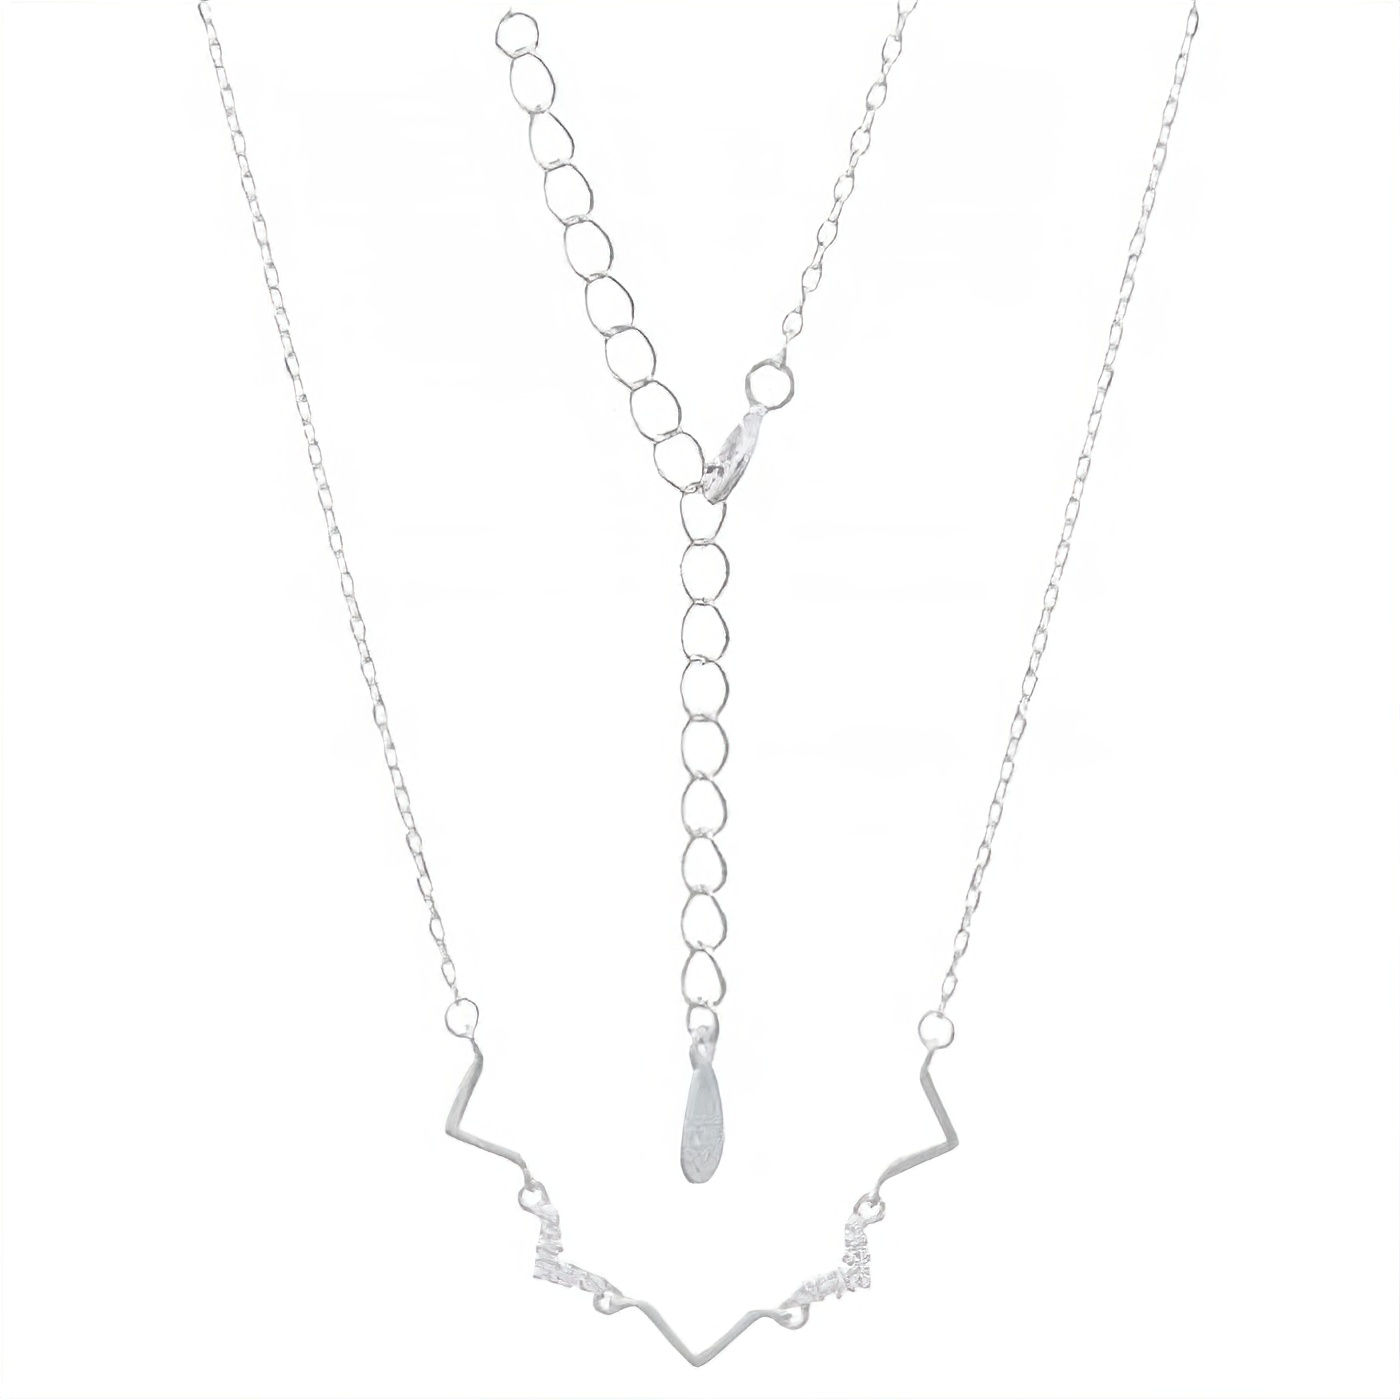 Zigzag Cubic Zirconia White With 925 Silver Chain Necklace by BeYindi 